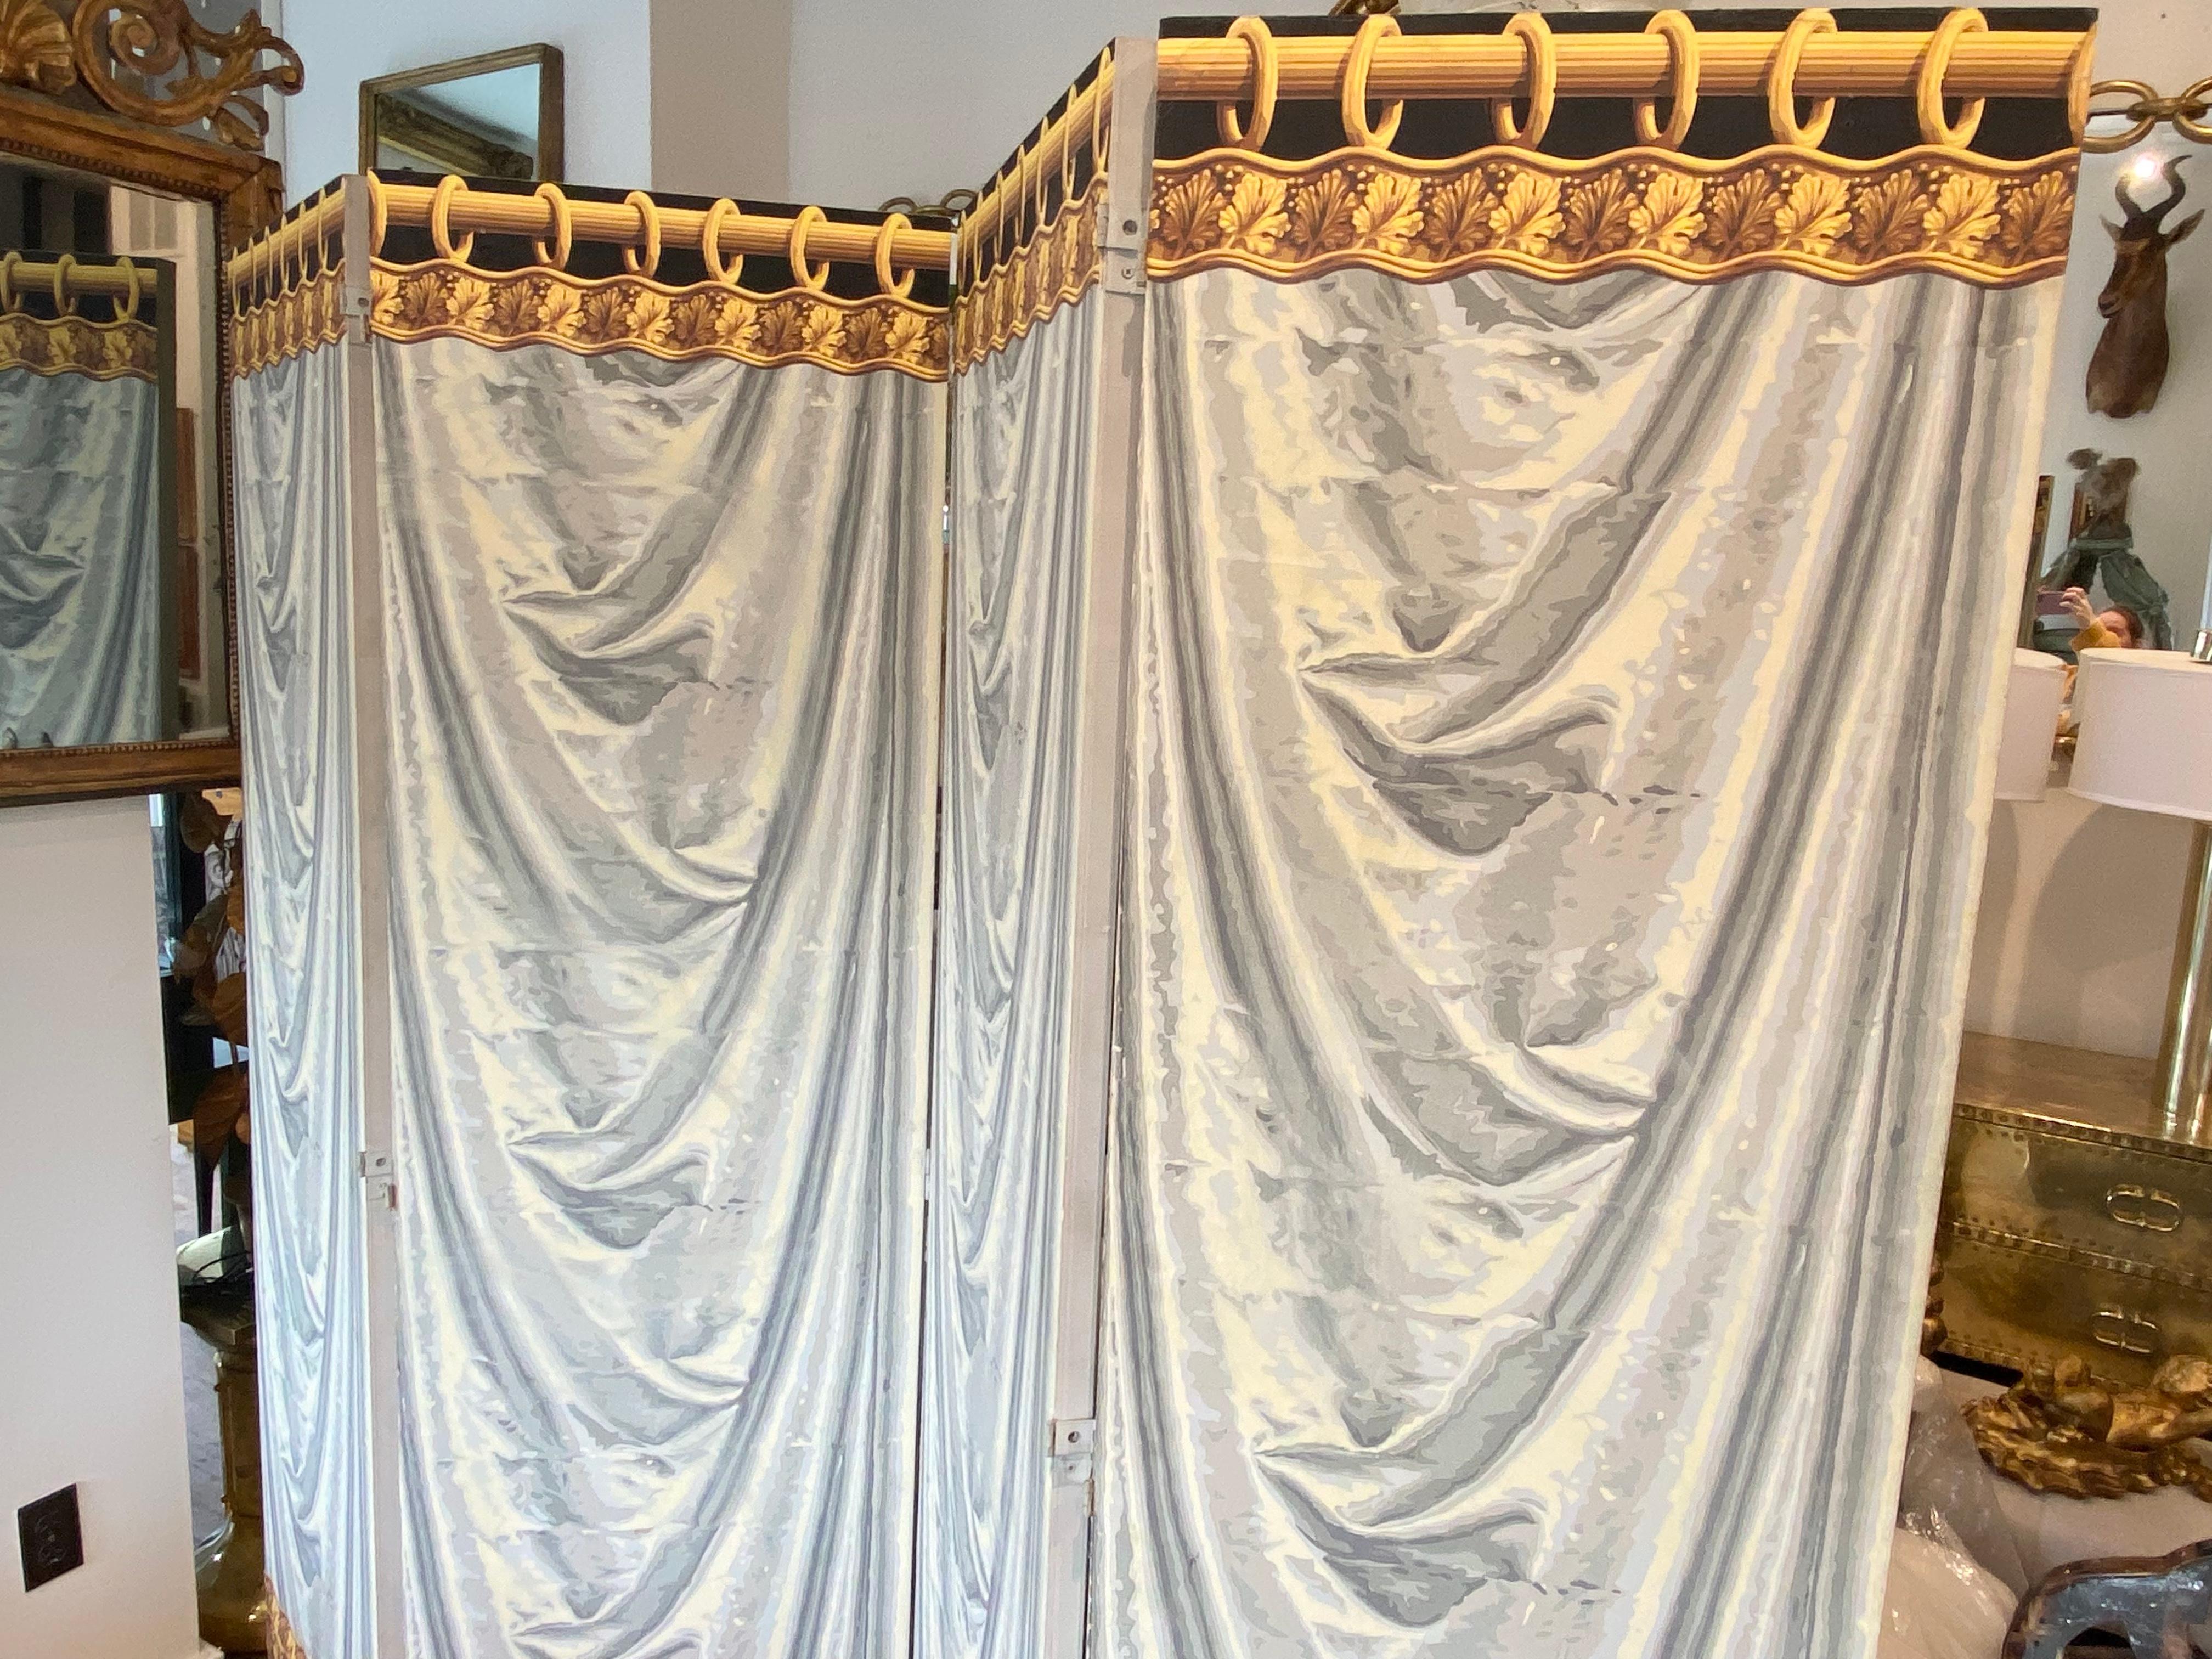 Wonderful 4 panel wallpaper screen made of hollow core wood and papered on both sides similarly with draped fabric. elegant trompe l'oeil paper in the Zuber style.